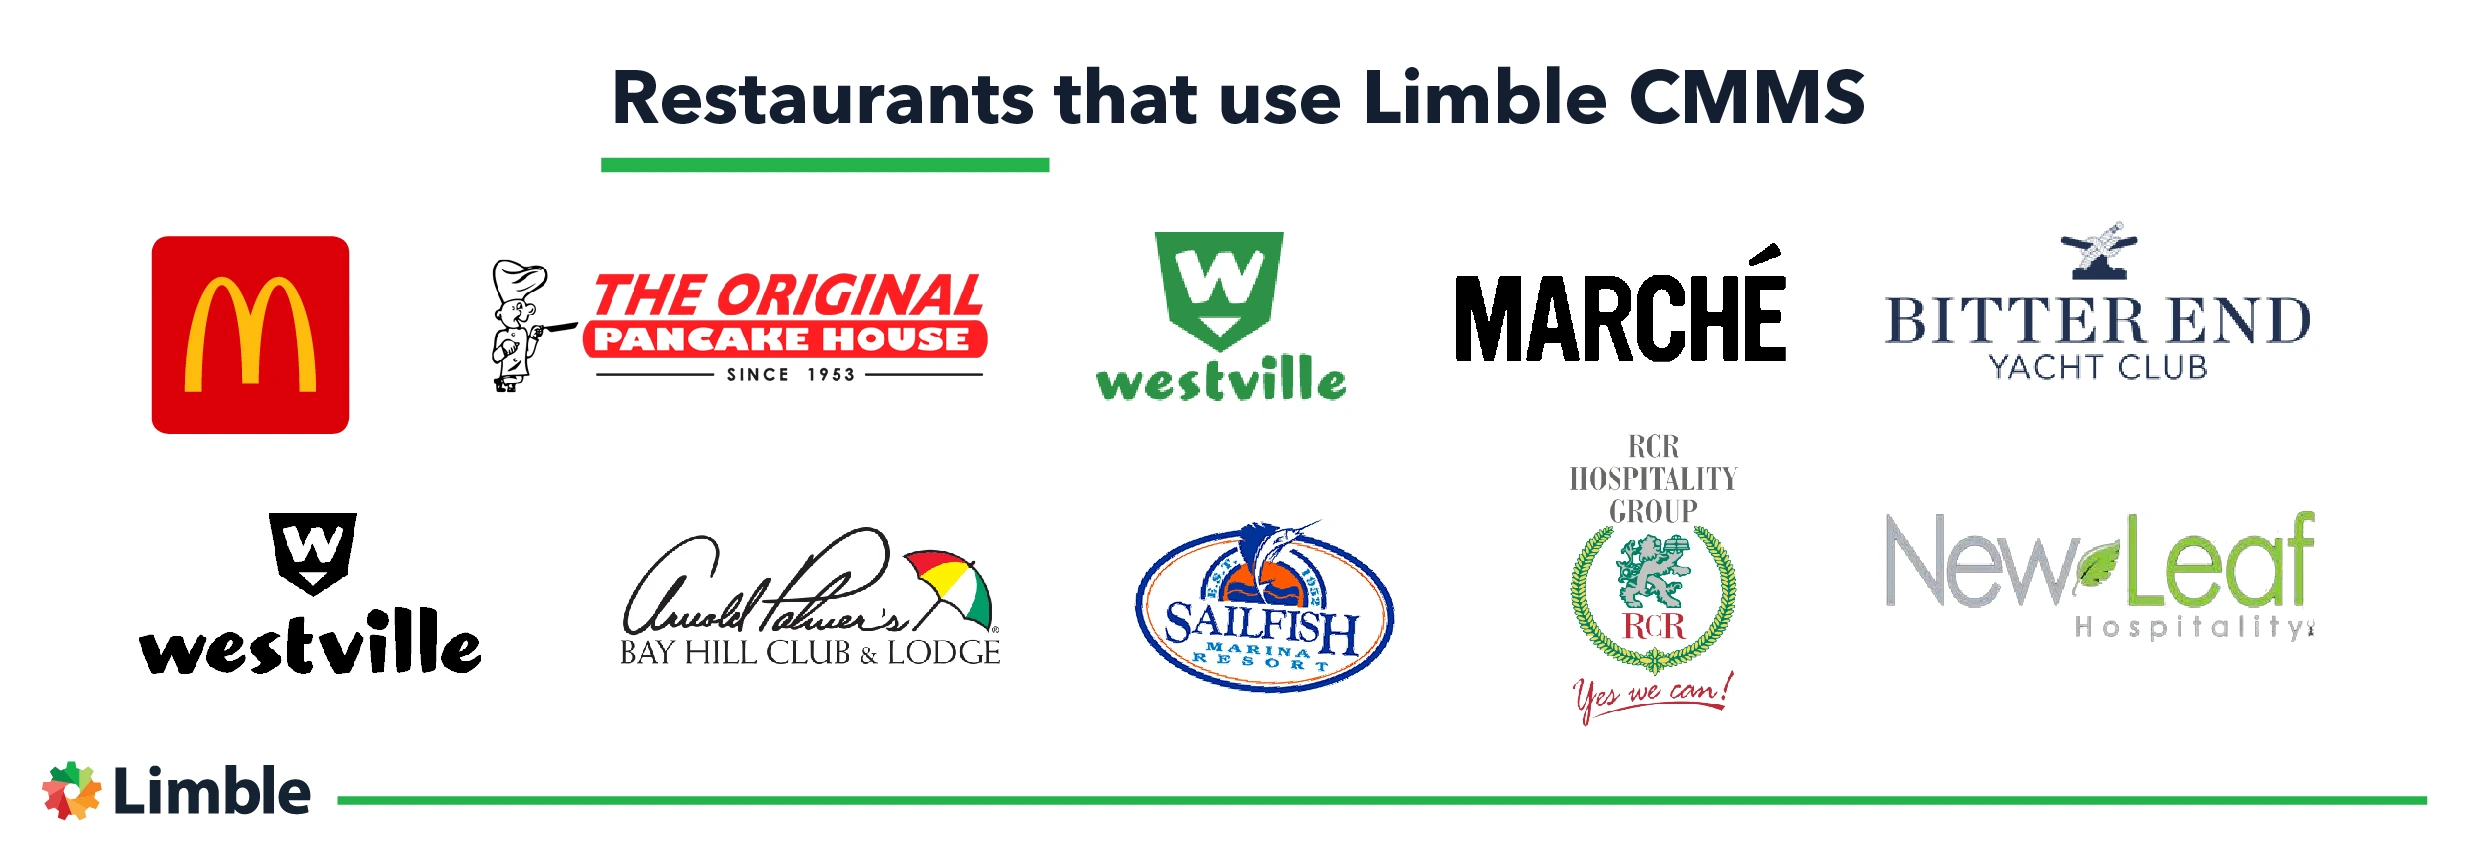 restaurants that use Limble CMMS graphic